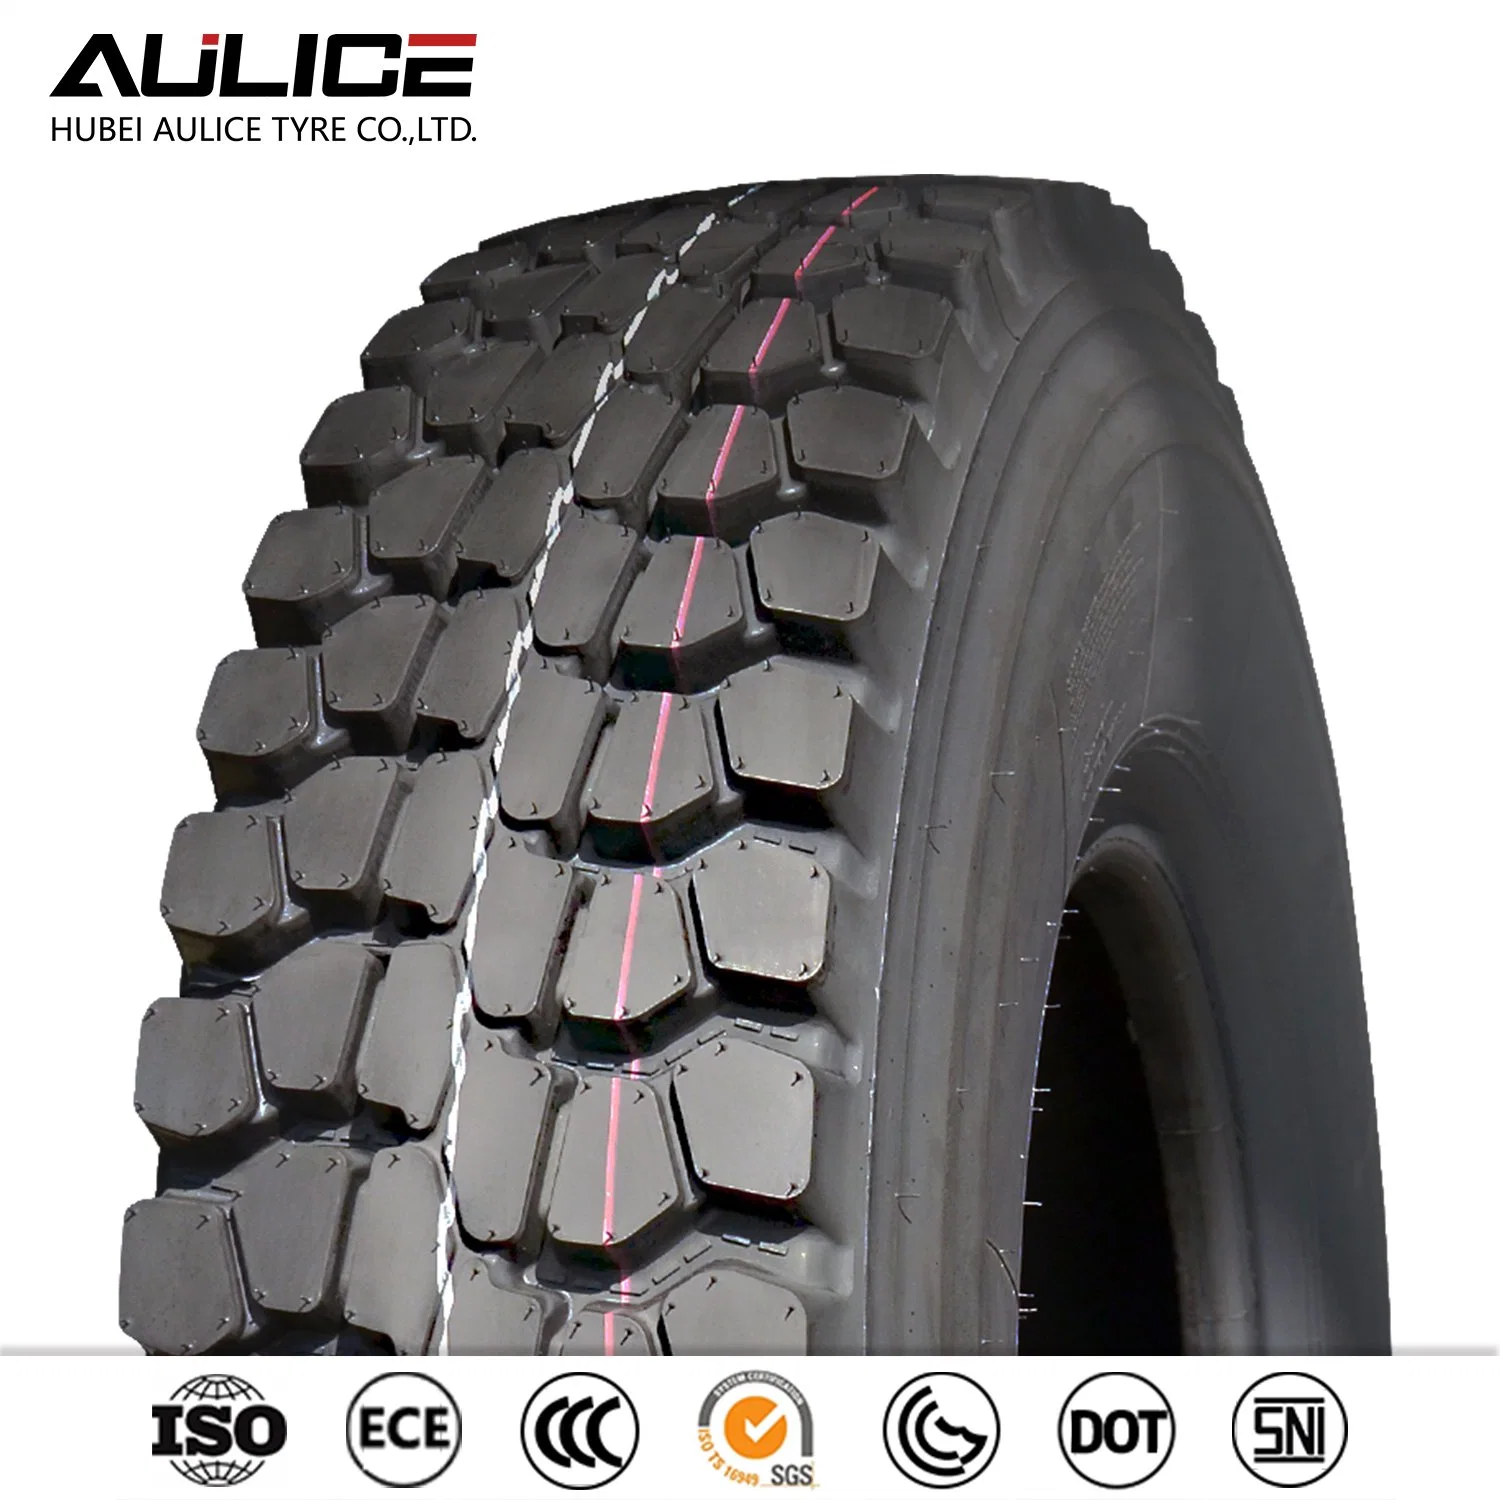 Truck tire 6.50R16 Wholesale Truck Tires Car Tyres Truck Tyre with ECE,DOT,CCC,ISO certification